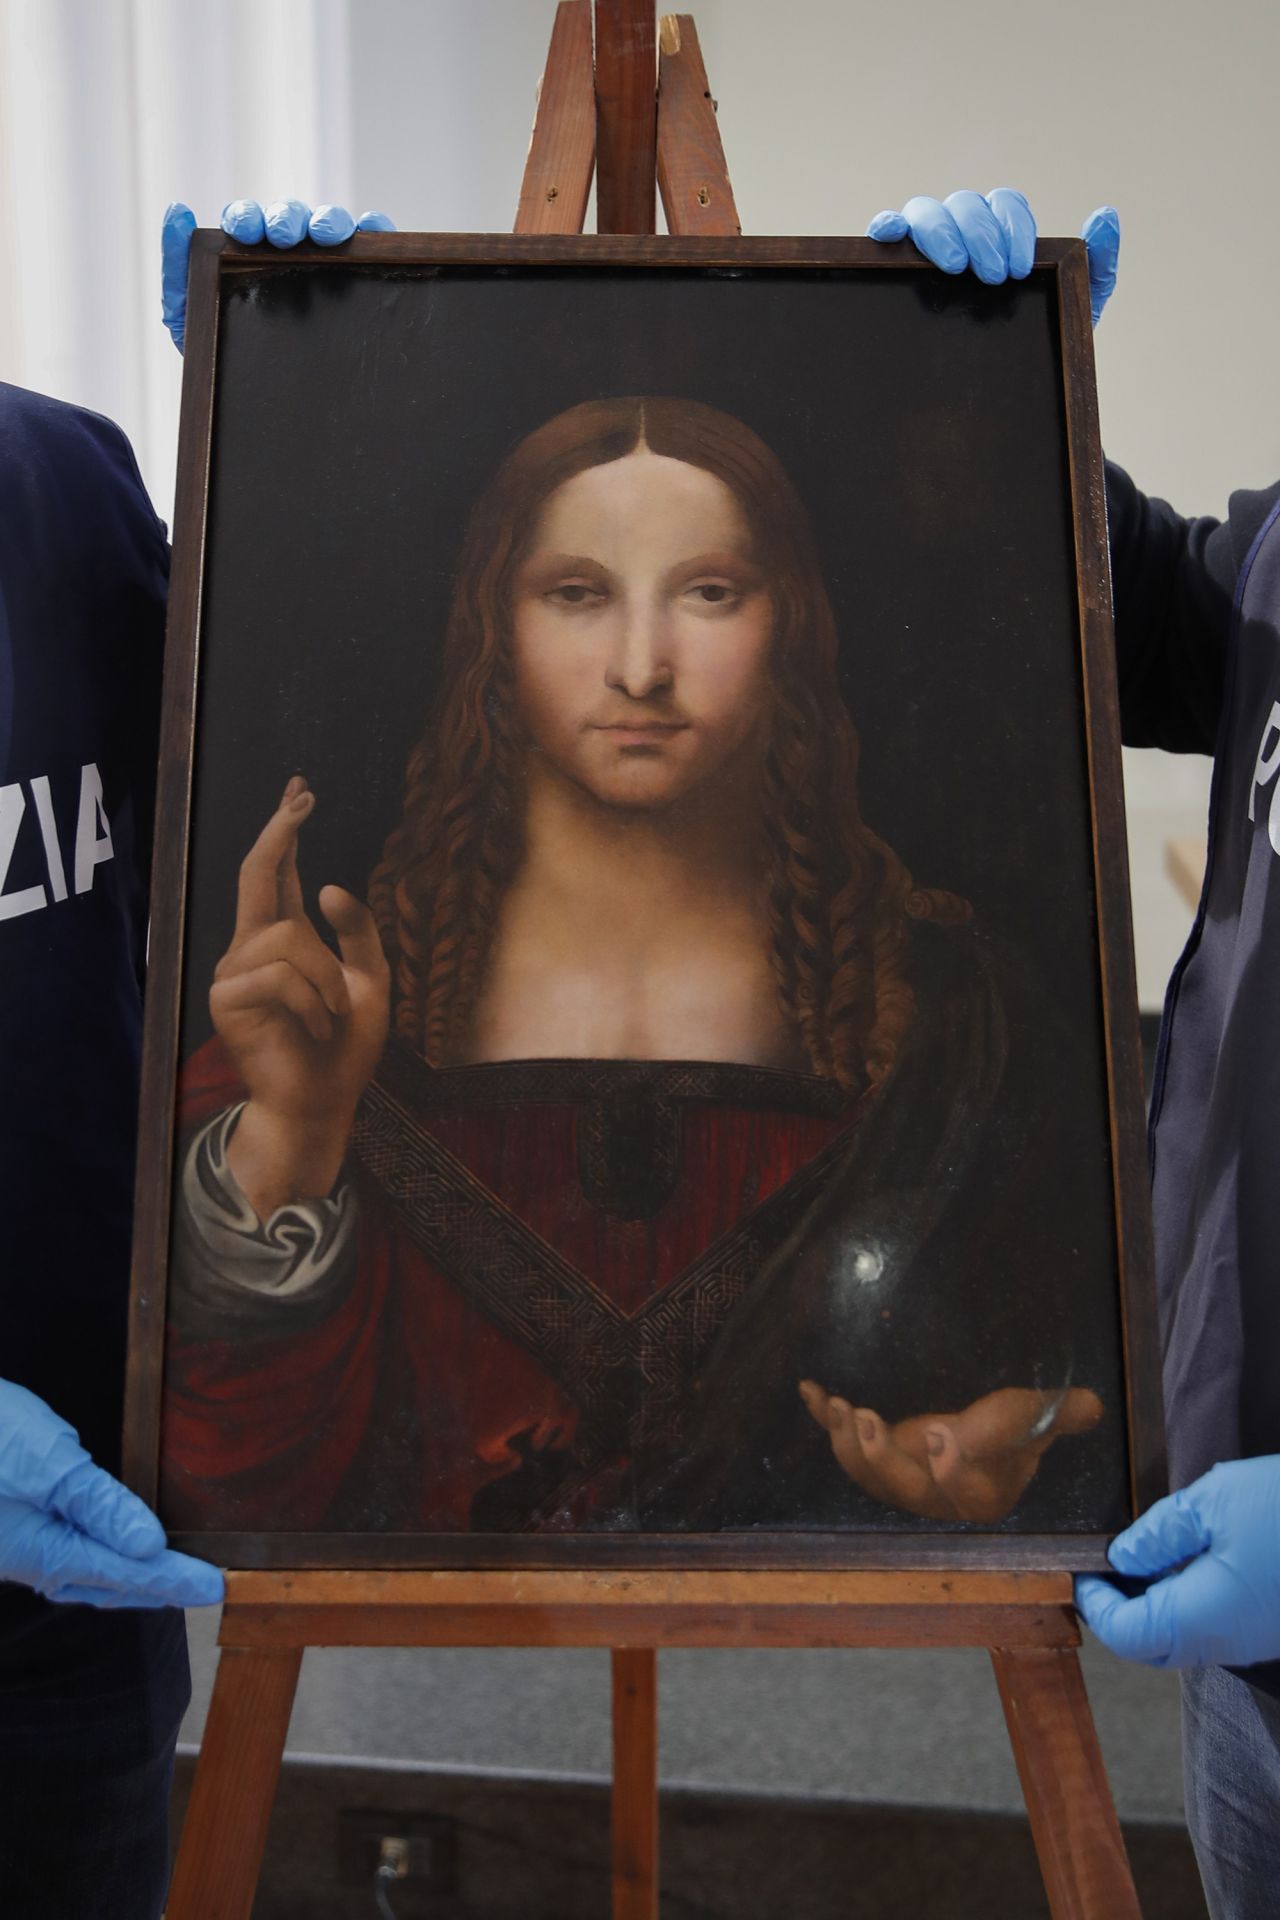 Italian police present the recovered painting, which is believed to date back to the 1510s.